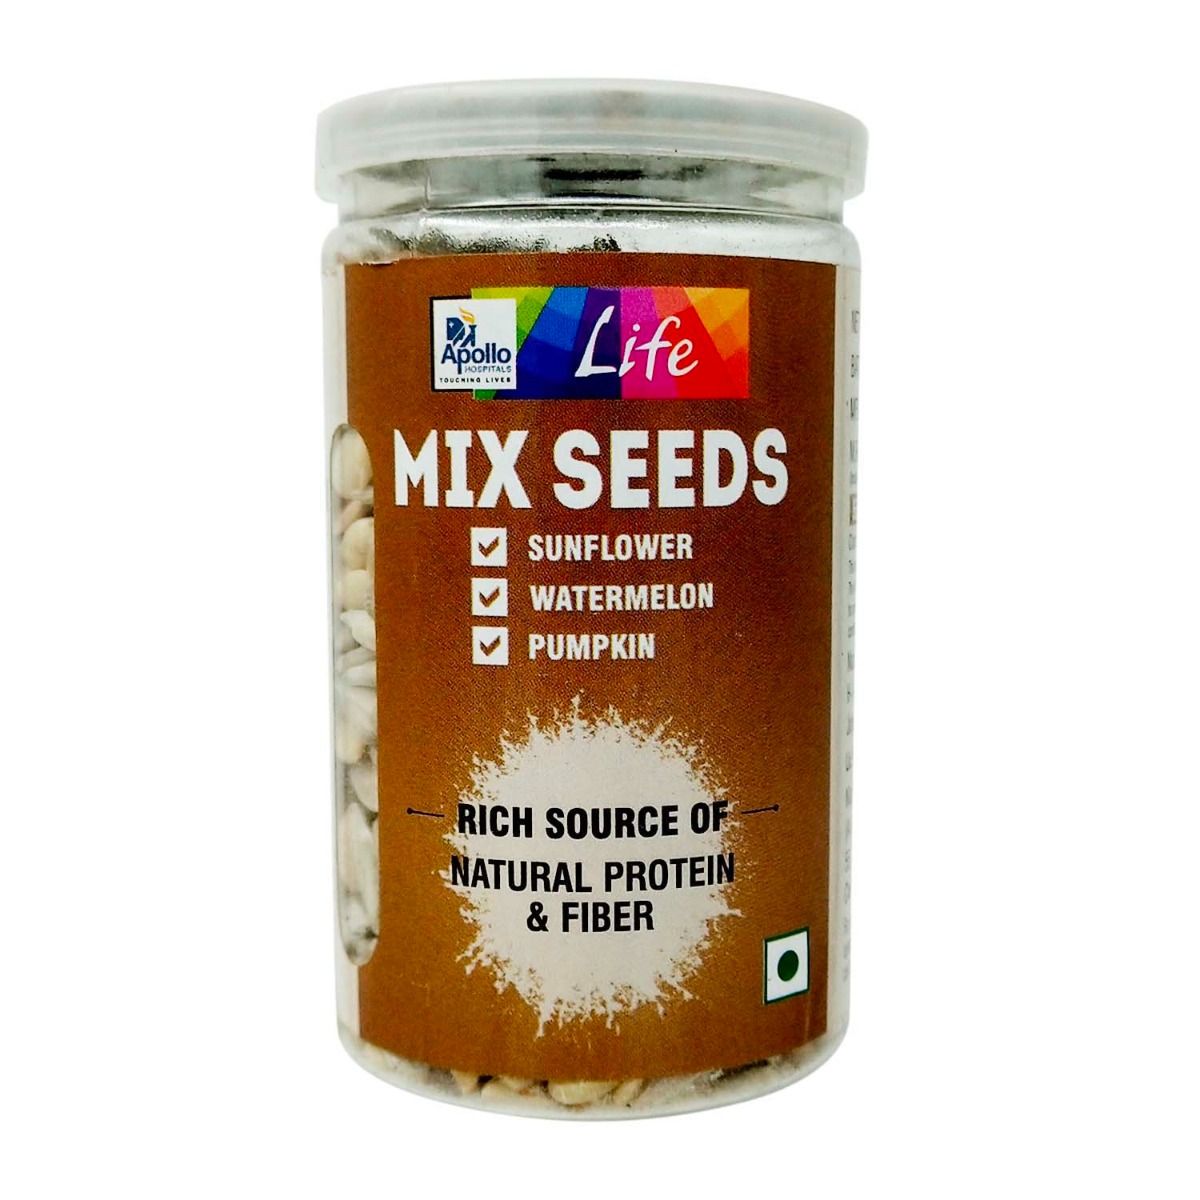 Apollo Pharmacy Mix Seeds, 100 gm, Pack of 1 